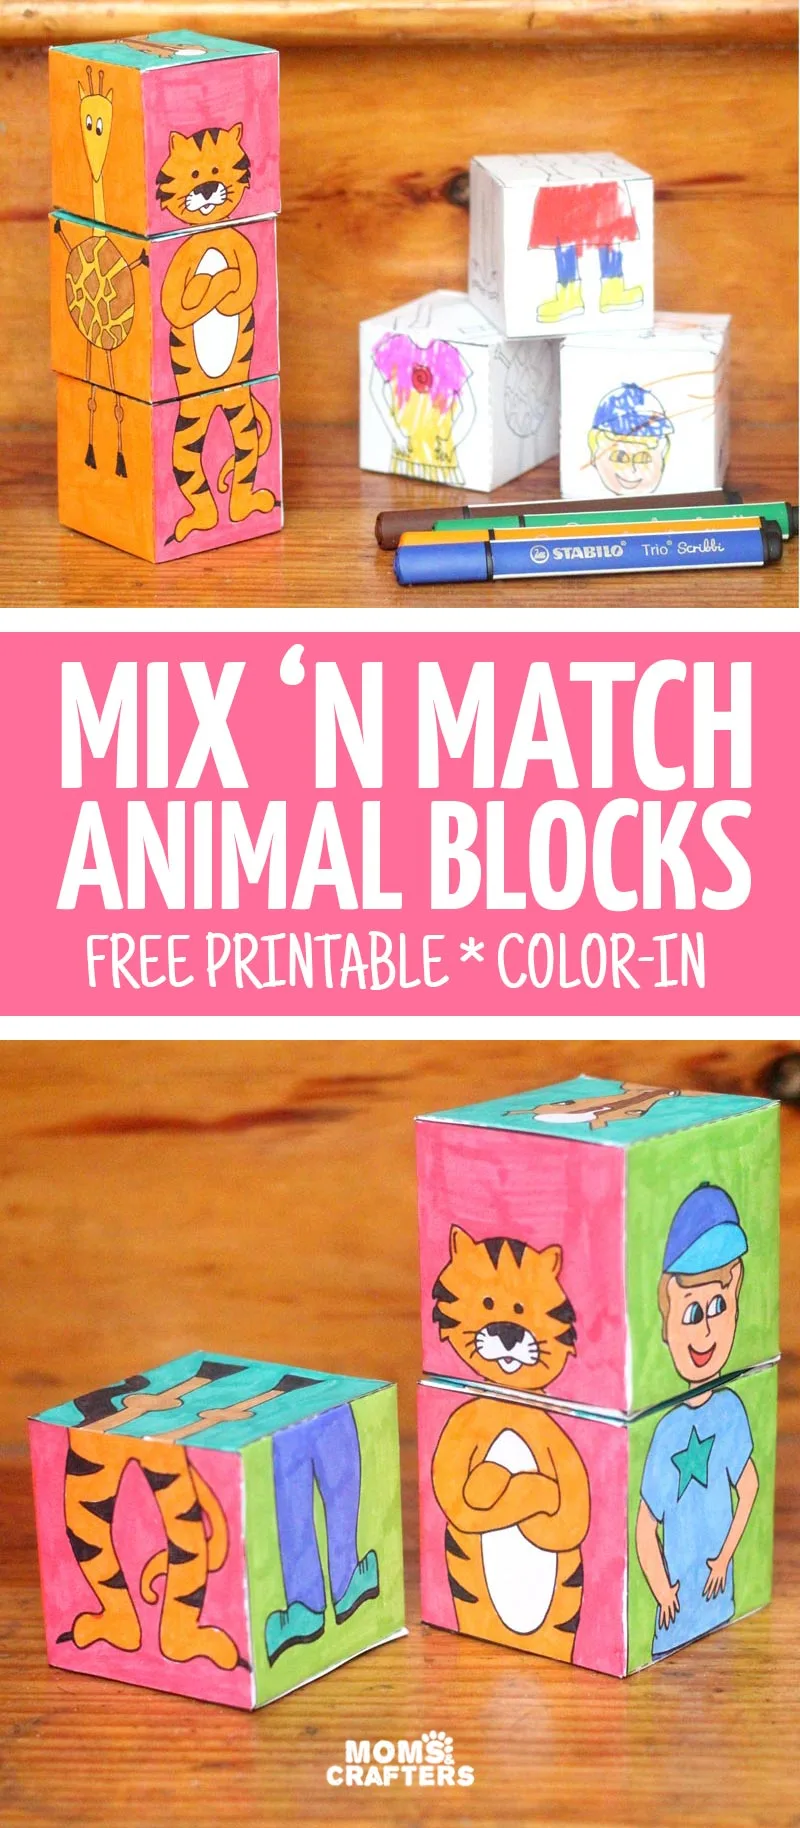 Print, color, and craft these adorable mix 'n match animal blocks! This is much more than a kids activity or a DIY toy - you can color this unique colouring page, create it, and then play with it! Perfect for toddlers and prechoolers, it's the ultimate printable kids activities you'll enjoy, and a perfect summer boredom buster.